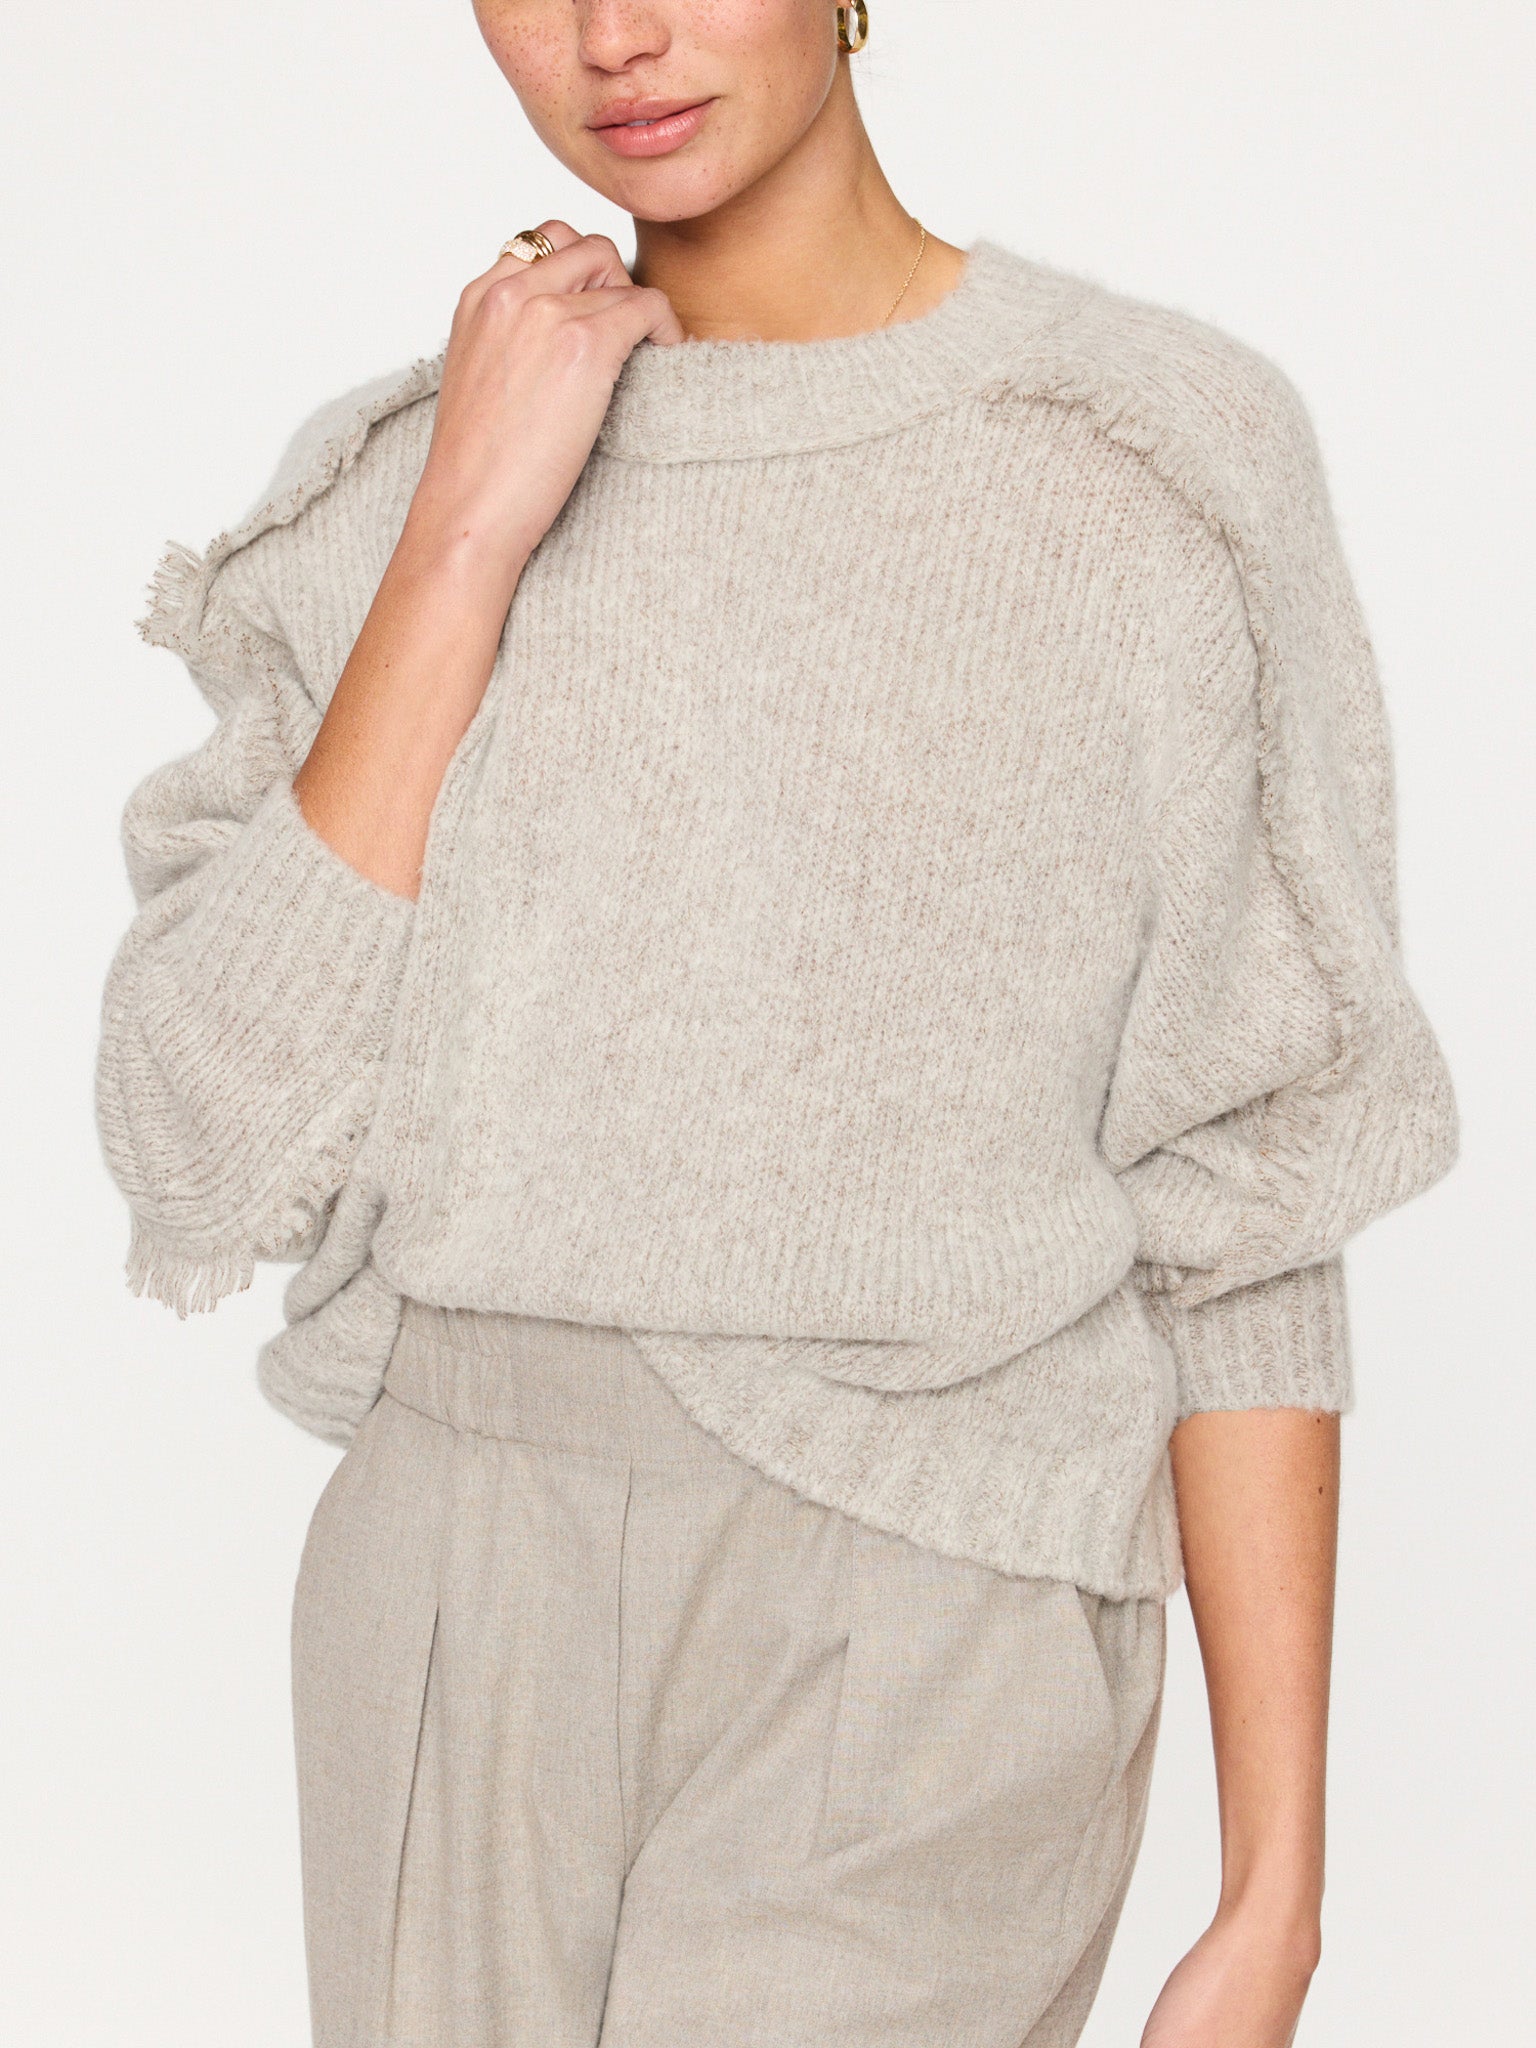 Aimee beige cashmere-wool crewneck sweater front view